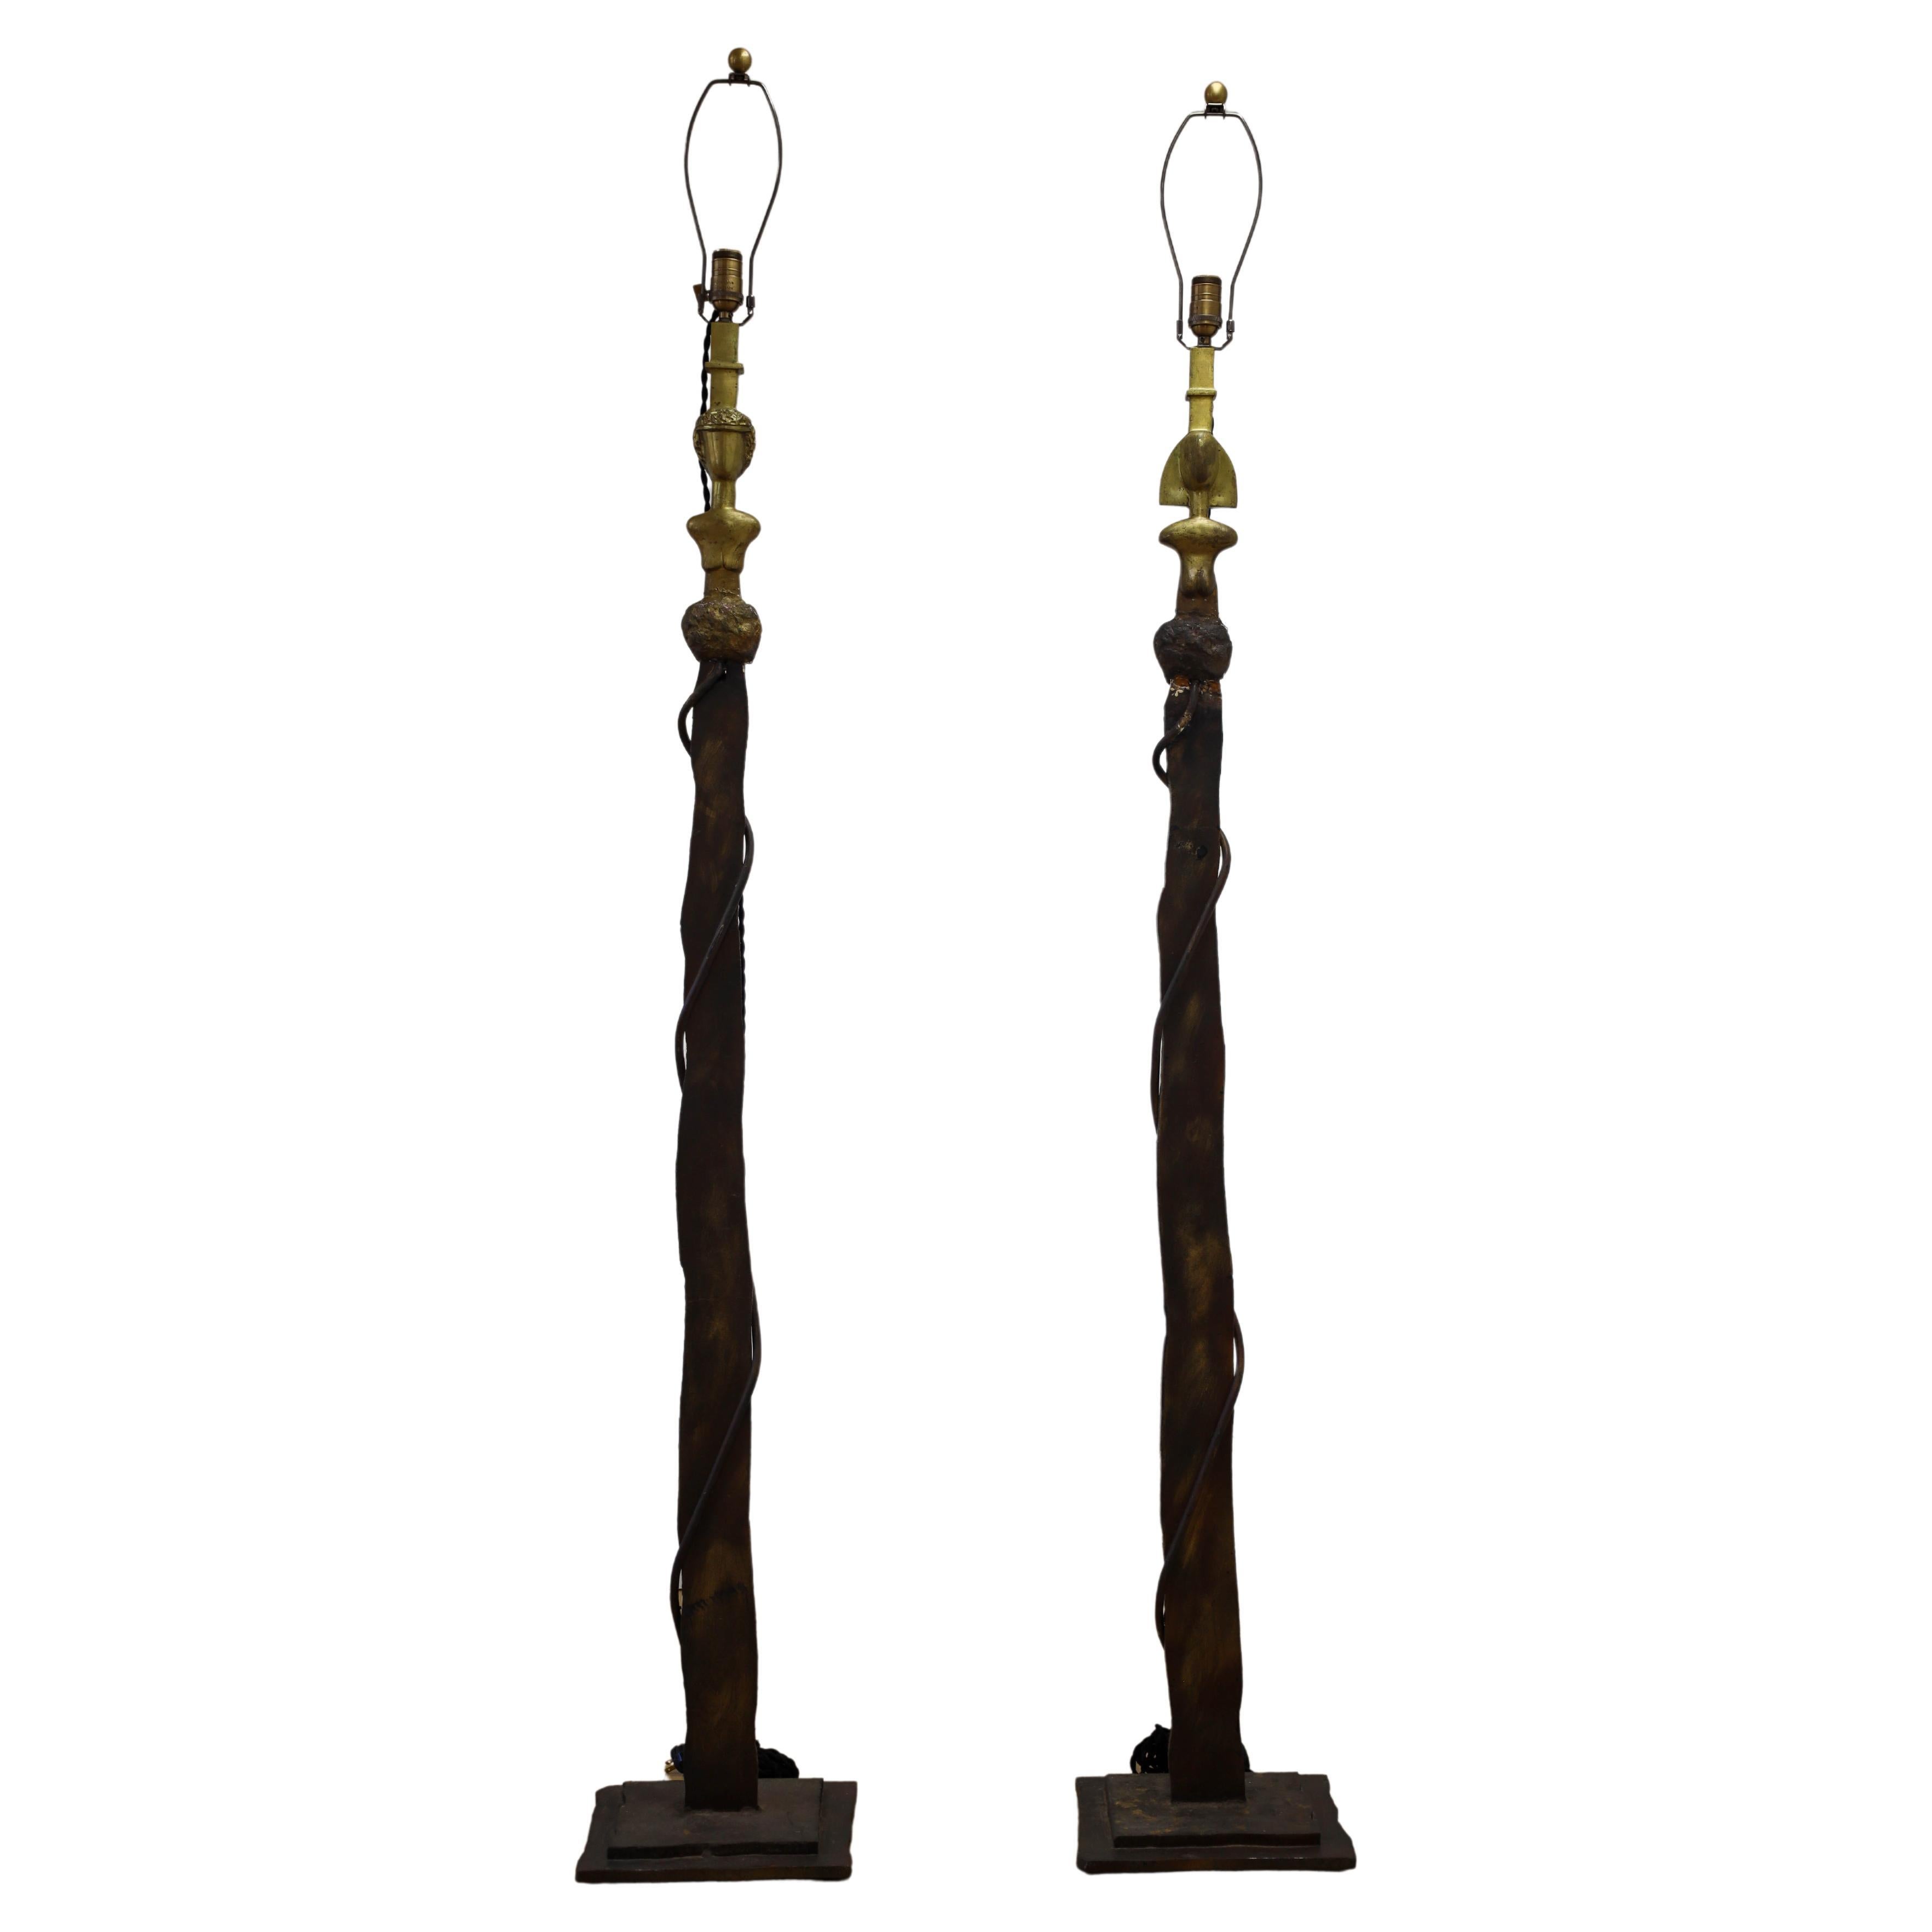 Vintage Pair of Bronze Sculptural Male and Female Floor Lamps, after Giacometti